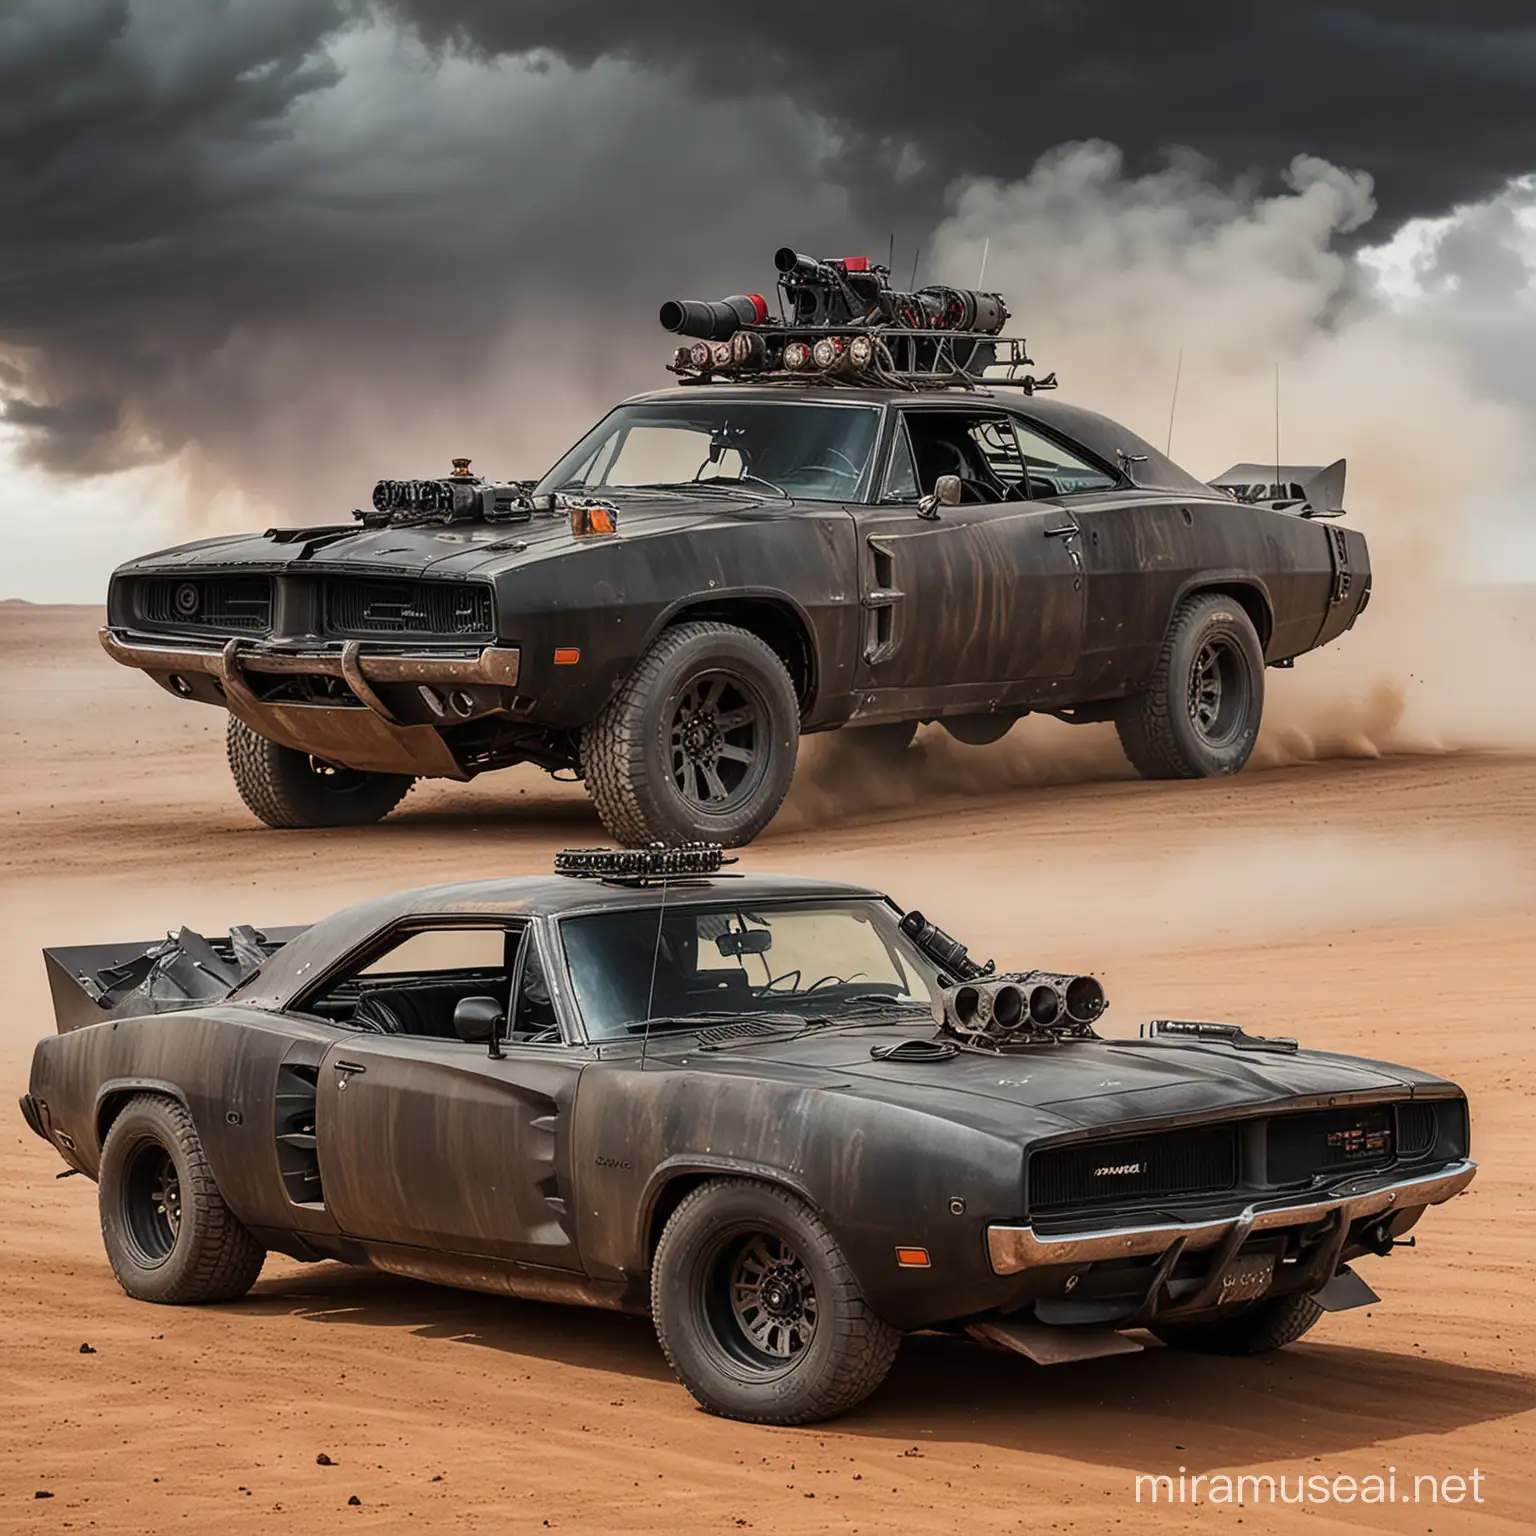 Mad Max Apocalypse Style Dodge Charger Racing Through Desolate Wasteland